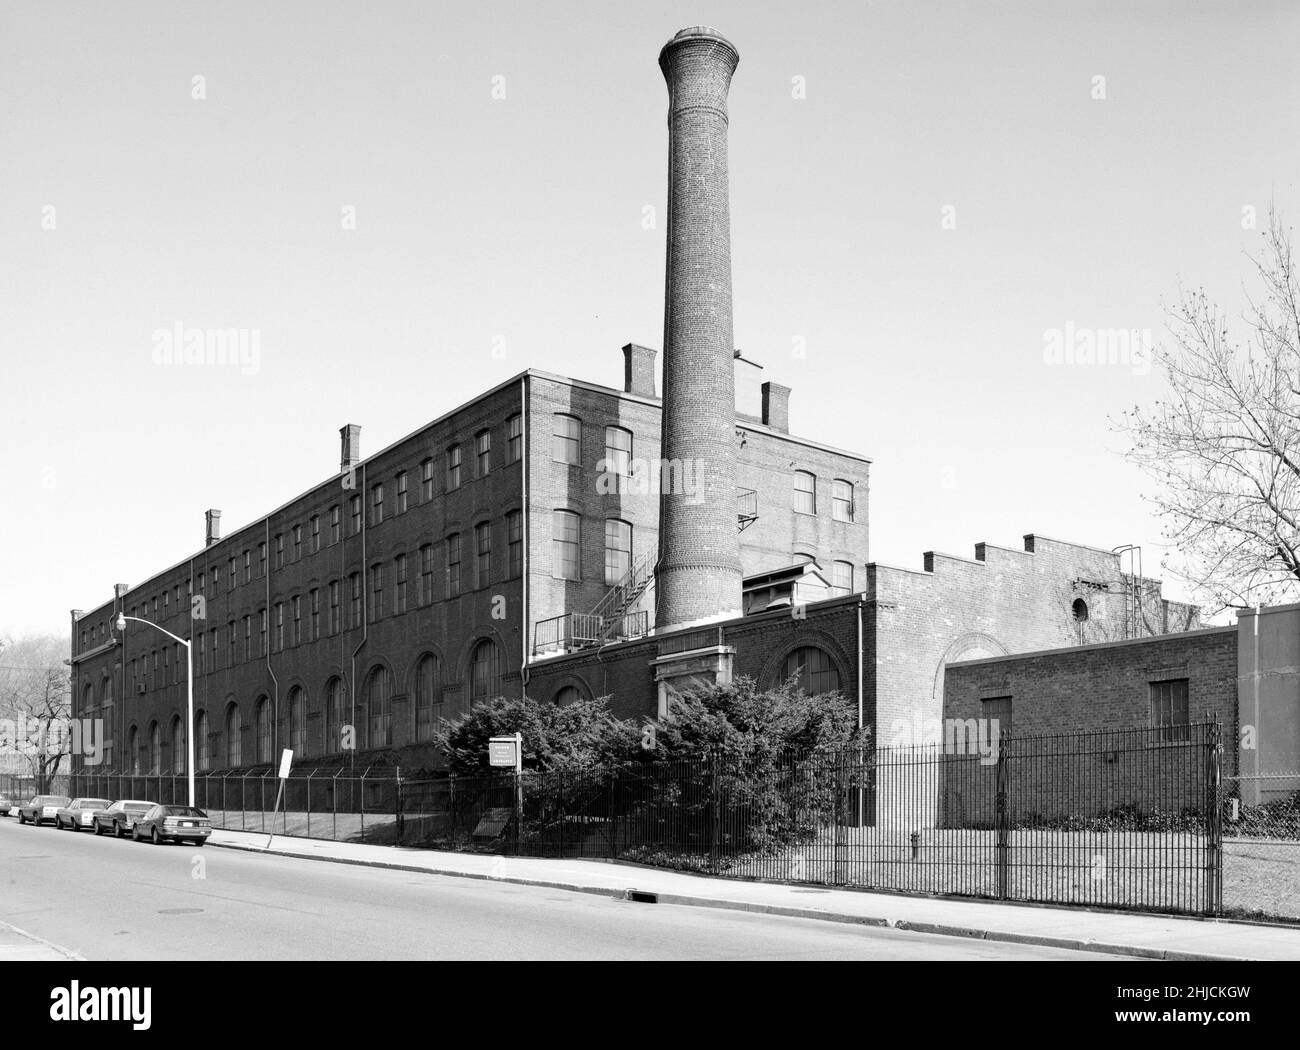 Thomas A. Edison Laboratories, Buildings 5 (main laboratory) and 6 (powerhouse, with smokestack), at Main Street and Lakeside Avenue, West Orange, Essex County, New Jersey. This site contained several of the manufacturing plants where Edison utilized new technology in commercial production. The main laboratory was originally built in 1887. Photo circa 1968. Stock Photo